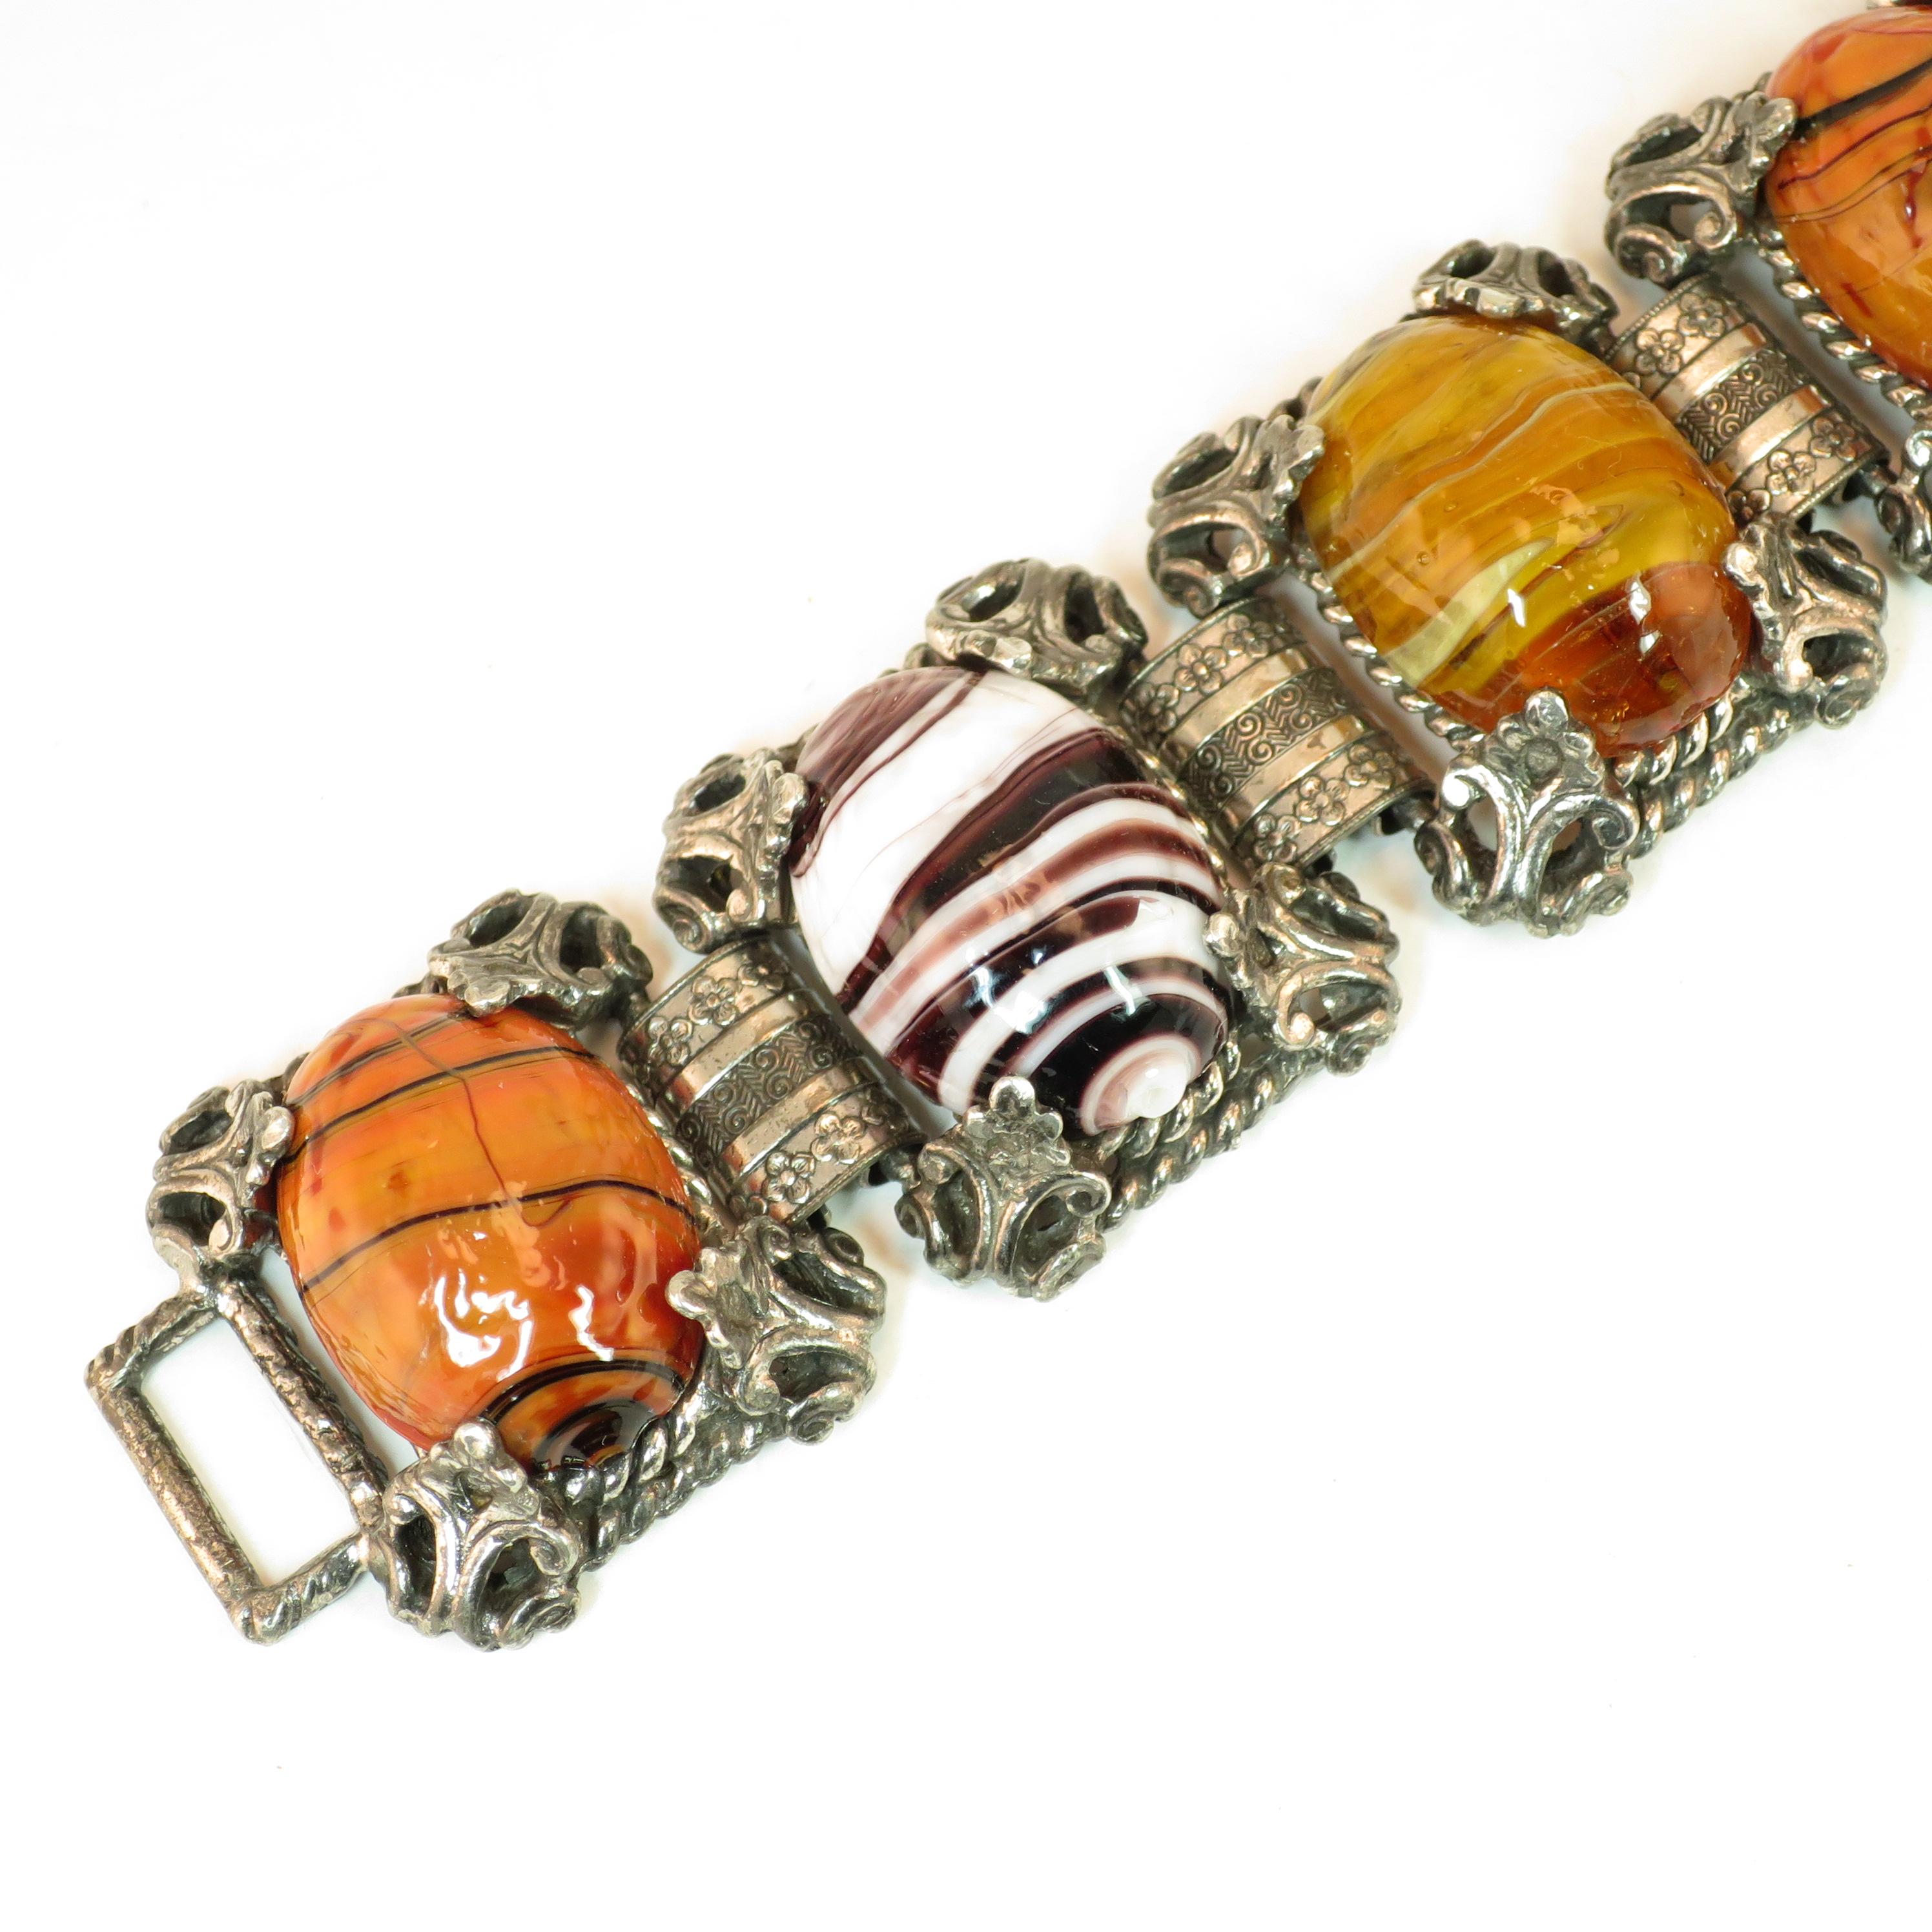 Offered here is a Mid-Century Selro Corp. silver-plated Florentine-design link bracelet from the 1950s. The construction exhibits six platforms linked by wide connectors. Each platform consists of a open rectangle in a twisted rope motif, and within